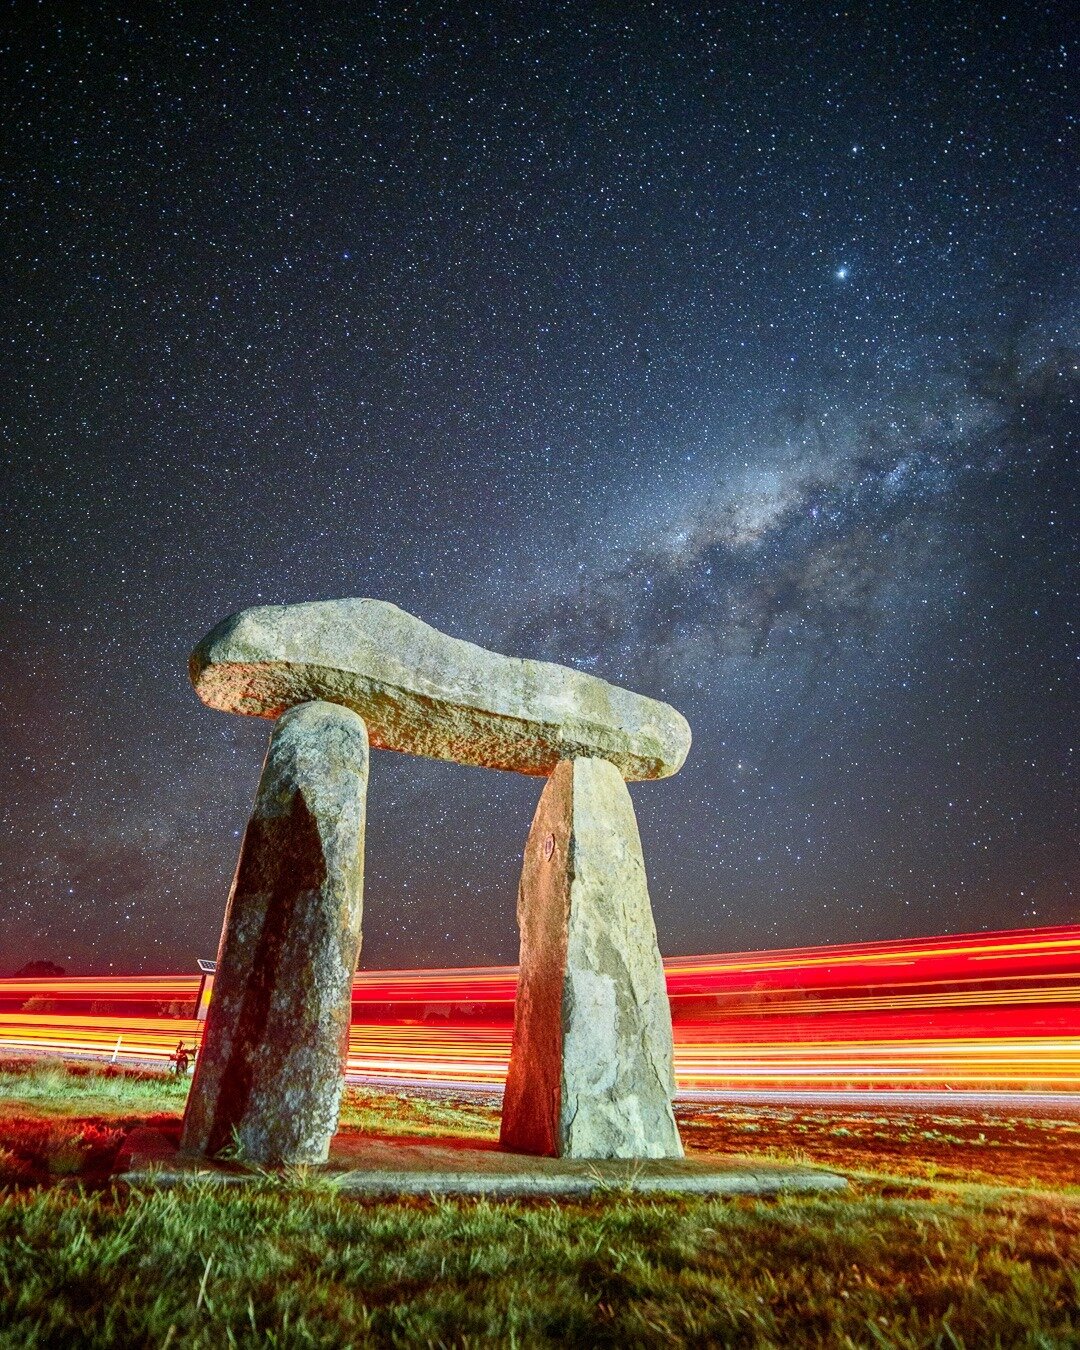 The return of Stonehenge ✨ I just love this photo a little too much not to post a similar one again. 
📍 Stonehenge, NSW, Australia - #ngoorabulcountry